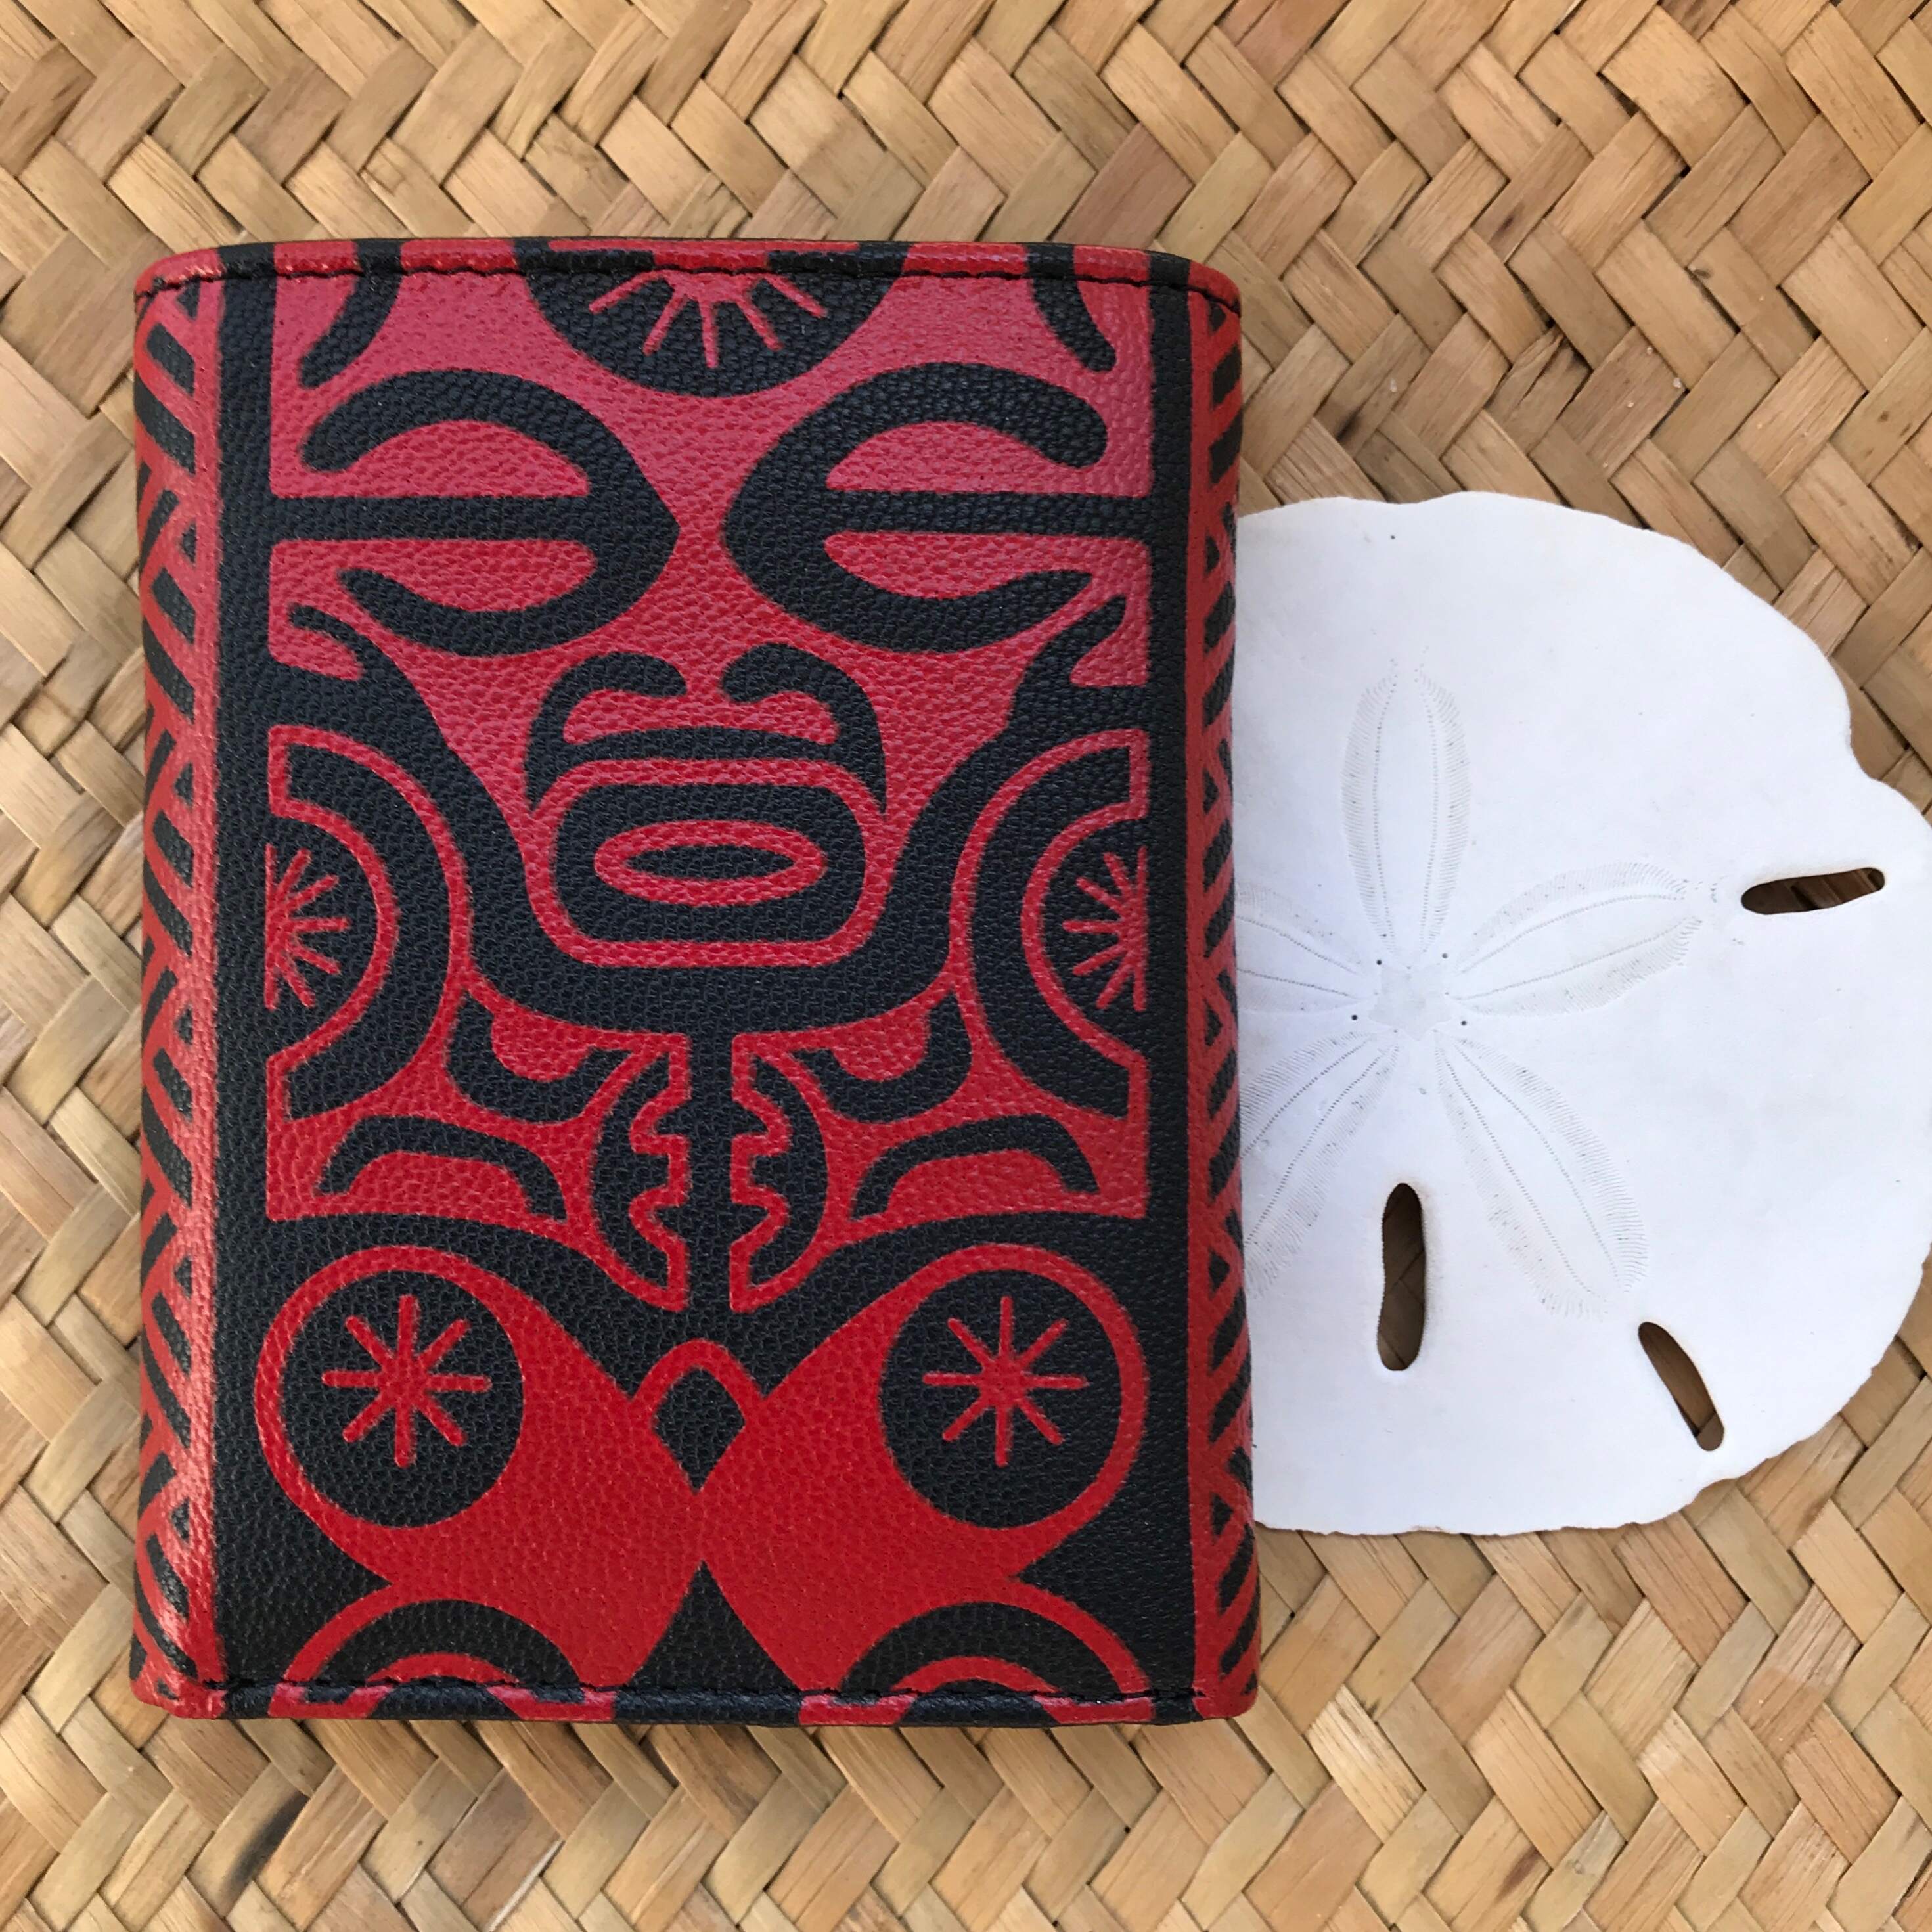 Red and black Hawaiian trifold leather wallet gift for men with tiki design | Aloha Products USA 